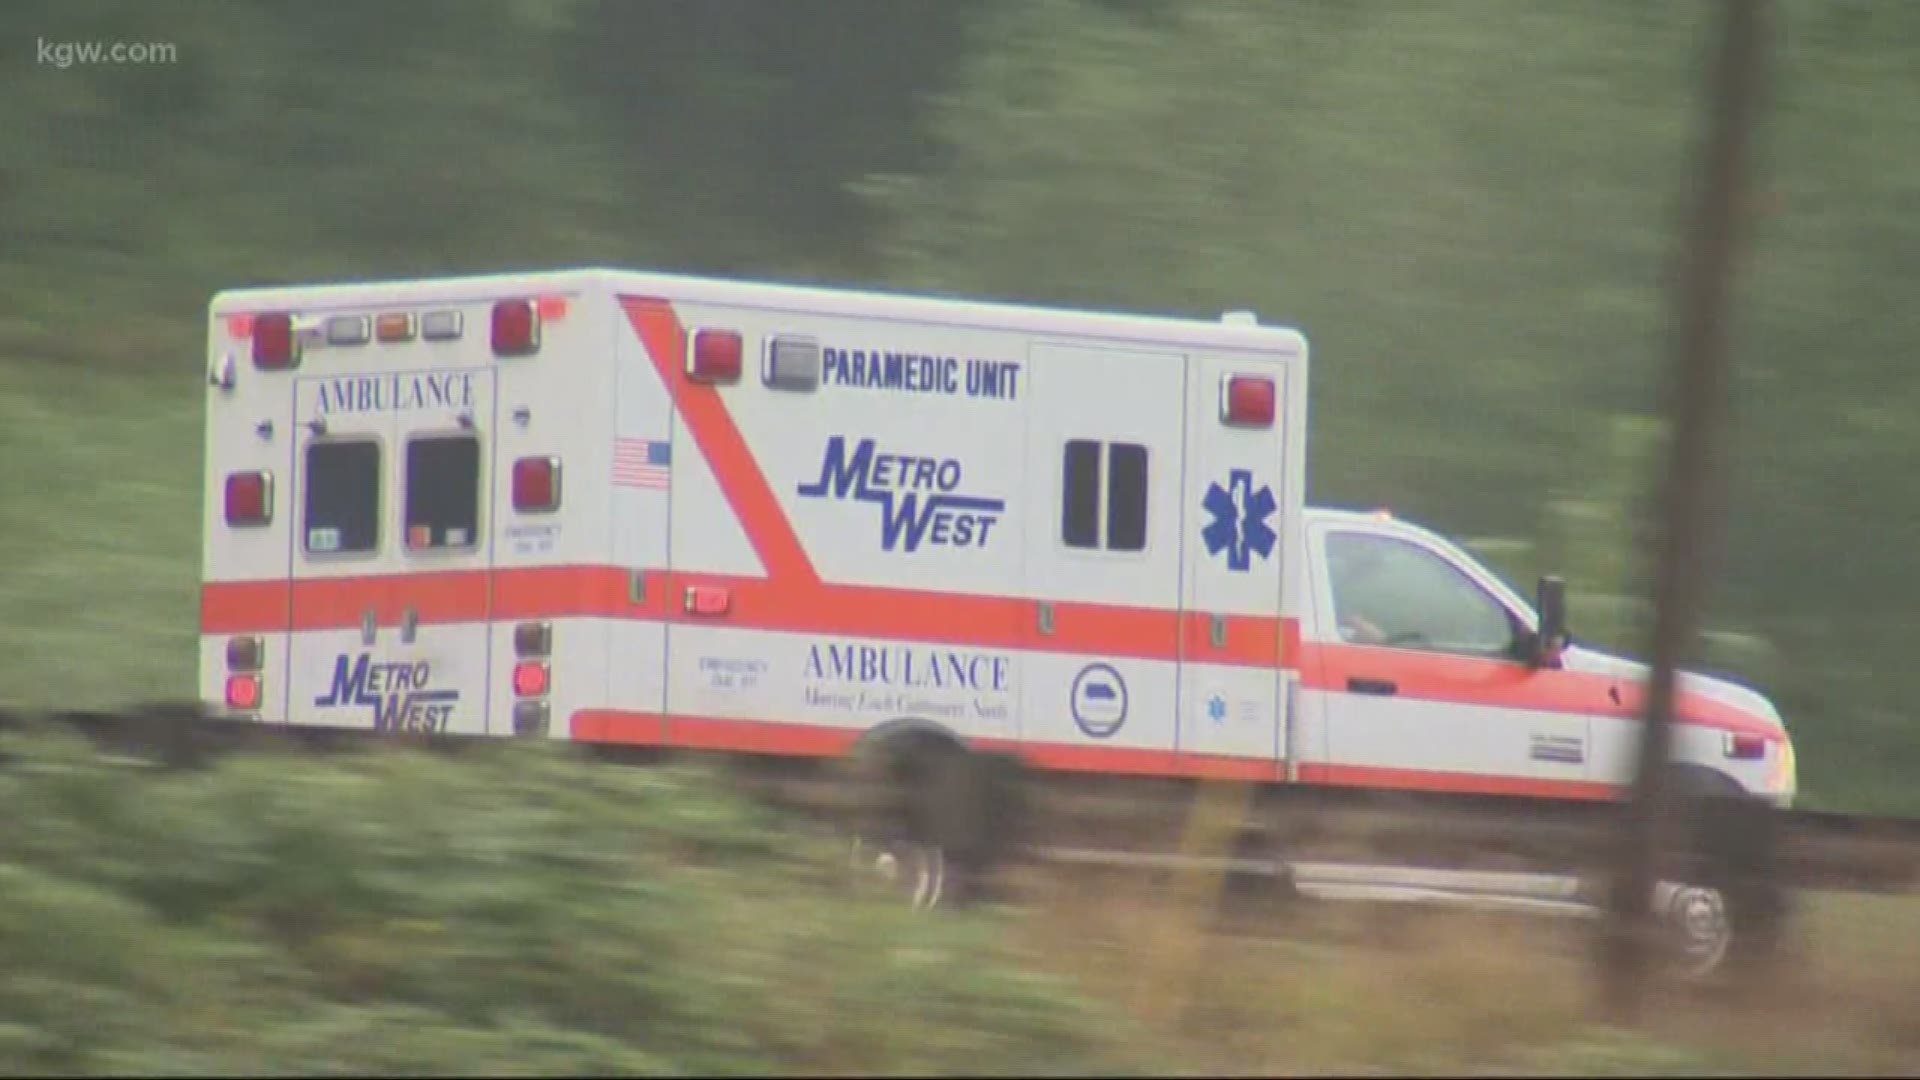 Two Washington County sheriff's deputies were shot Thursday afternoon in a remote stretch near Hagg Lake.  Andrew Cooper, a supervisor with Metro West ambulance, said his crews didn't think twice about responding. "We do it because we love what we do and we want to help everyone."